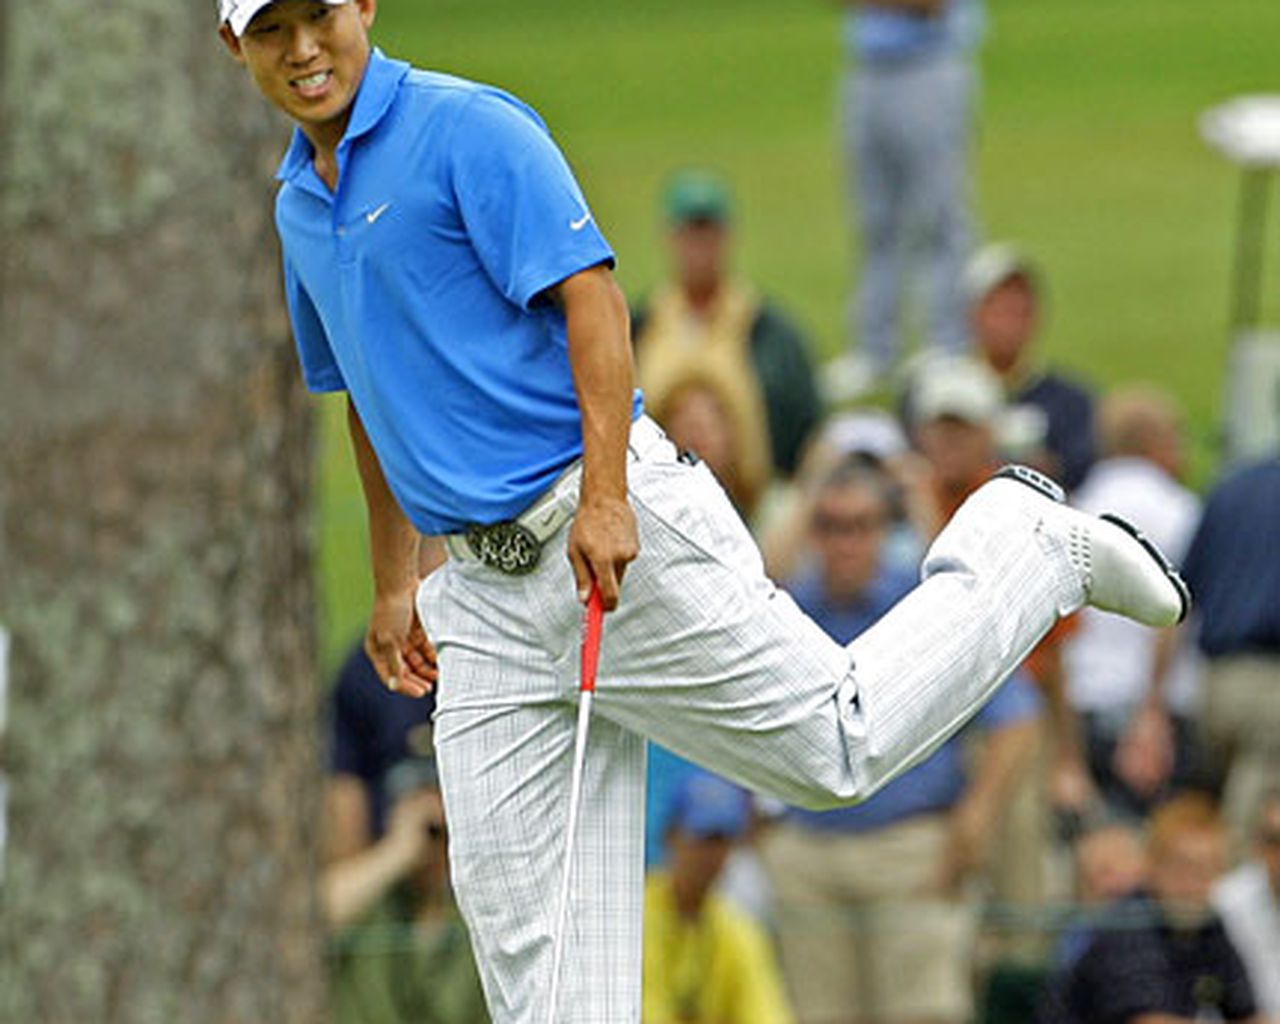 Anthony Kim Wallpapers